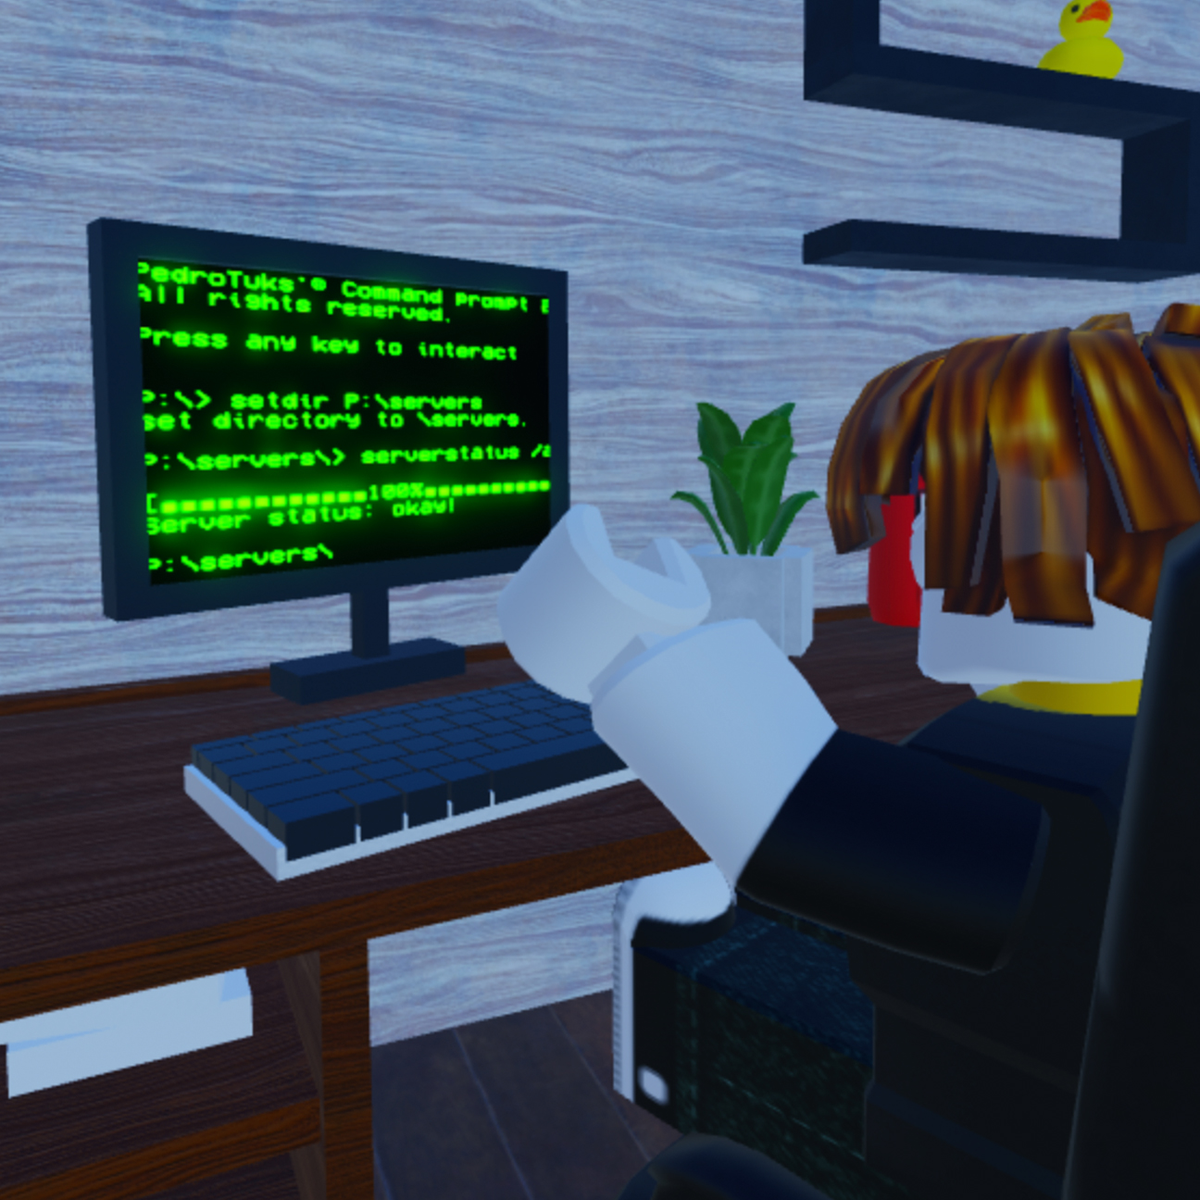 ALL CODES WORK 4x💰 Hacker Tycoon 👨‍💻 ROBLOX MARCH 4, 2023 